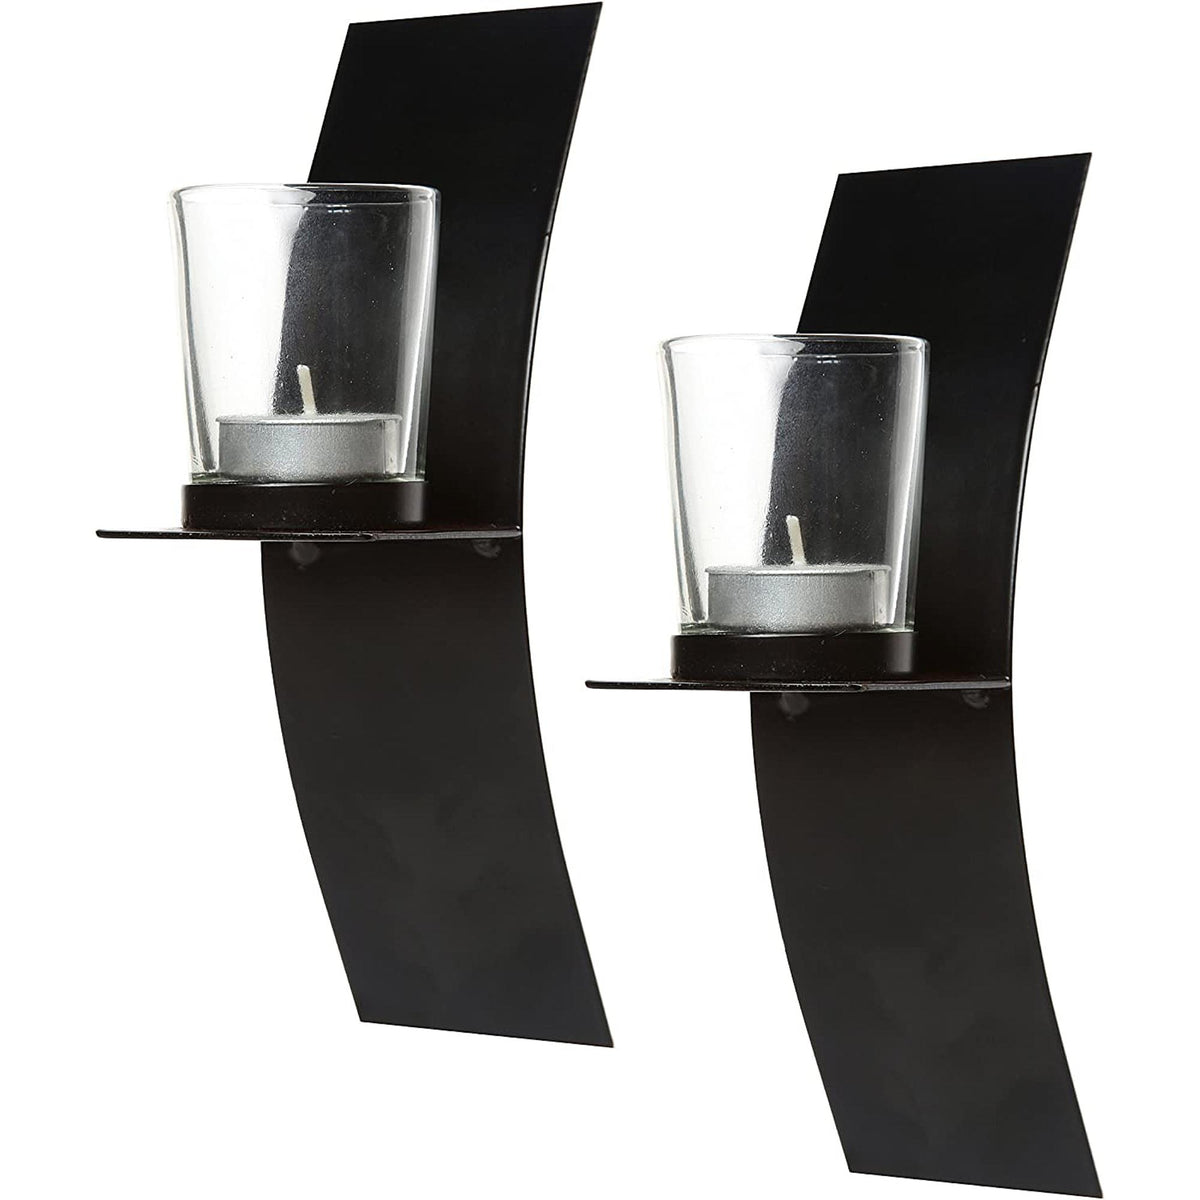 HOSLEY® Iron Wall Sconces,  Black Color, Set of 2,  9 inches High